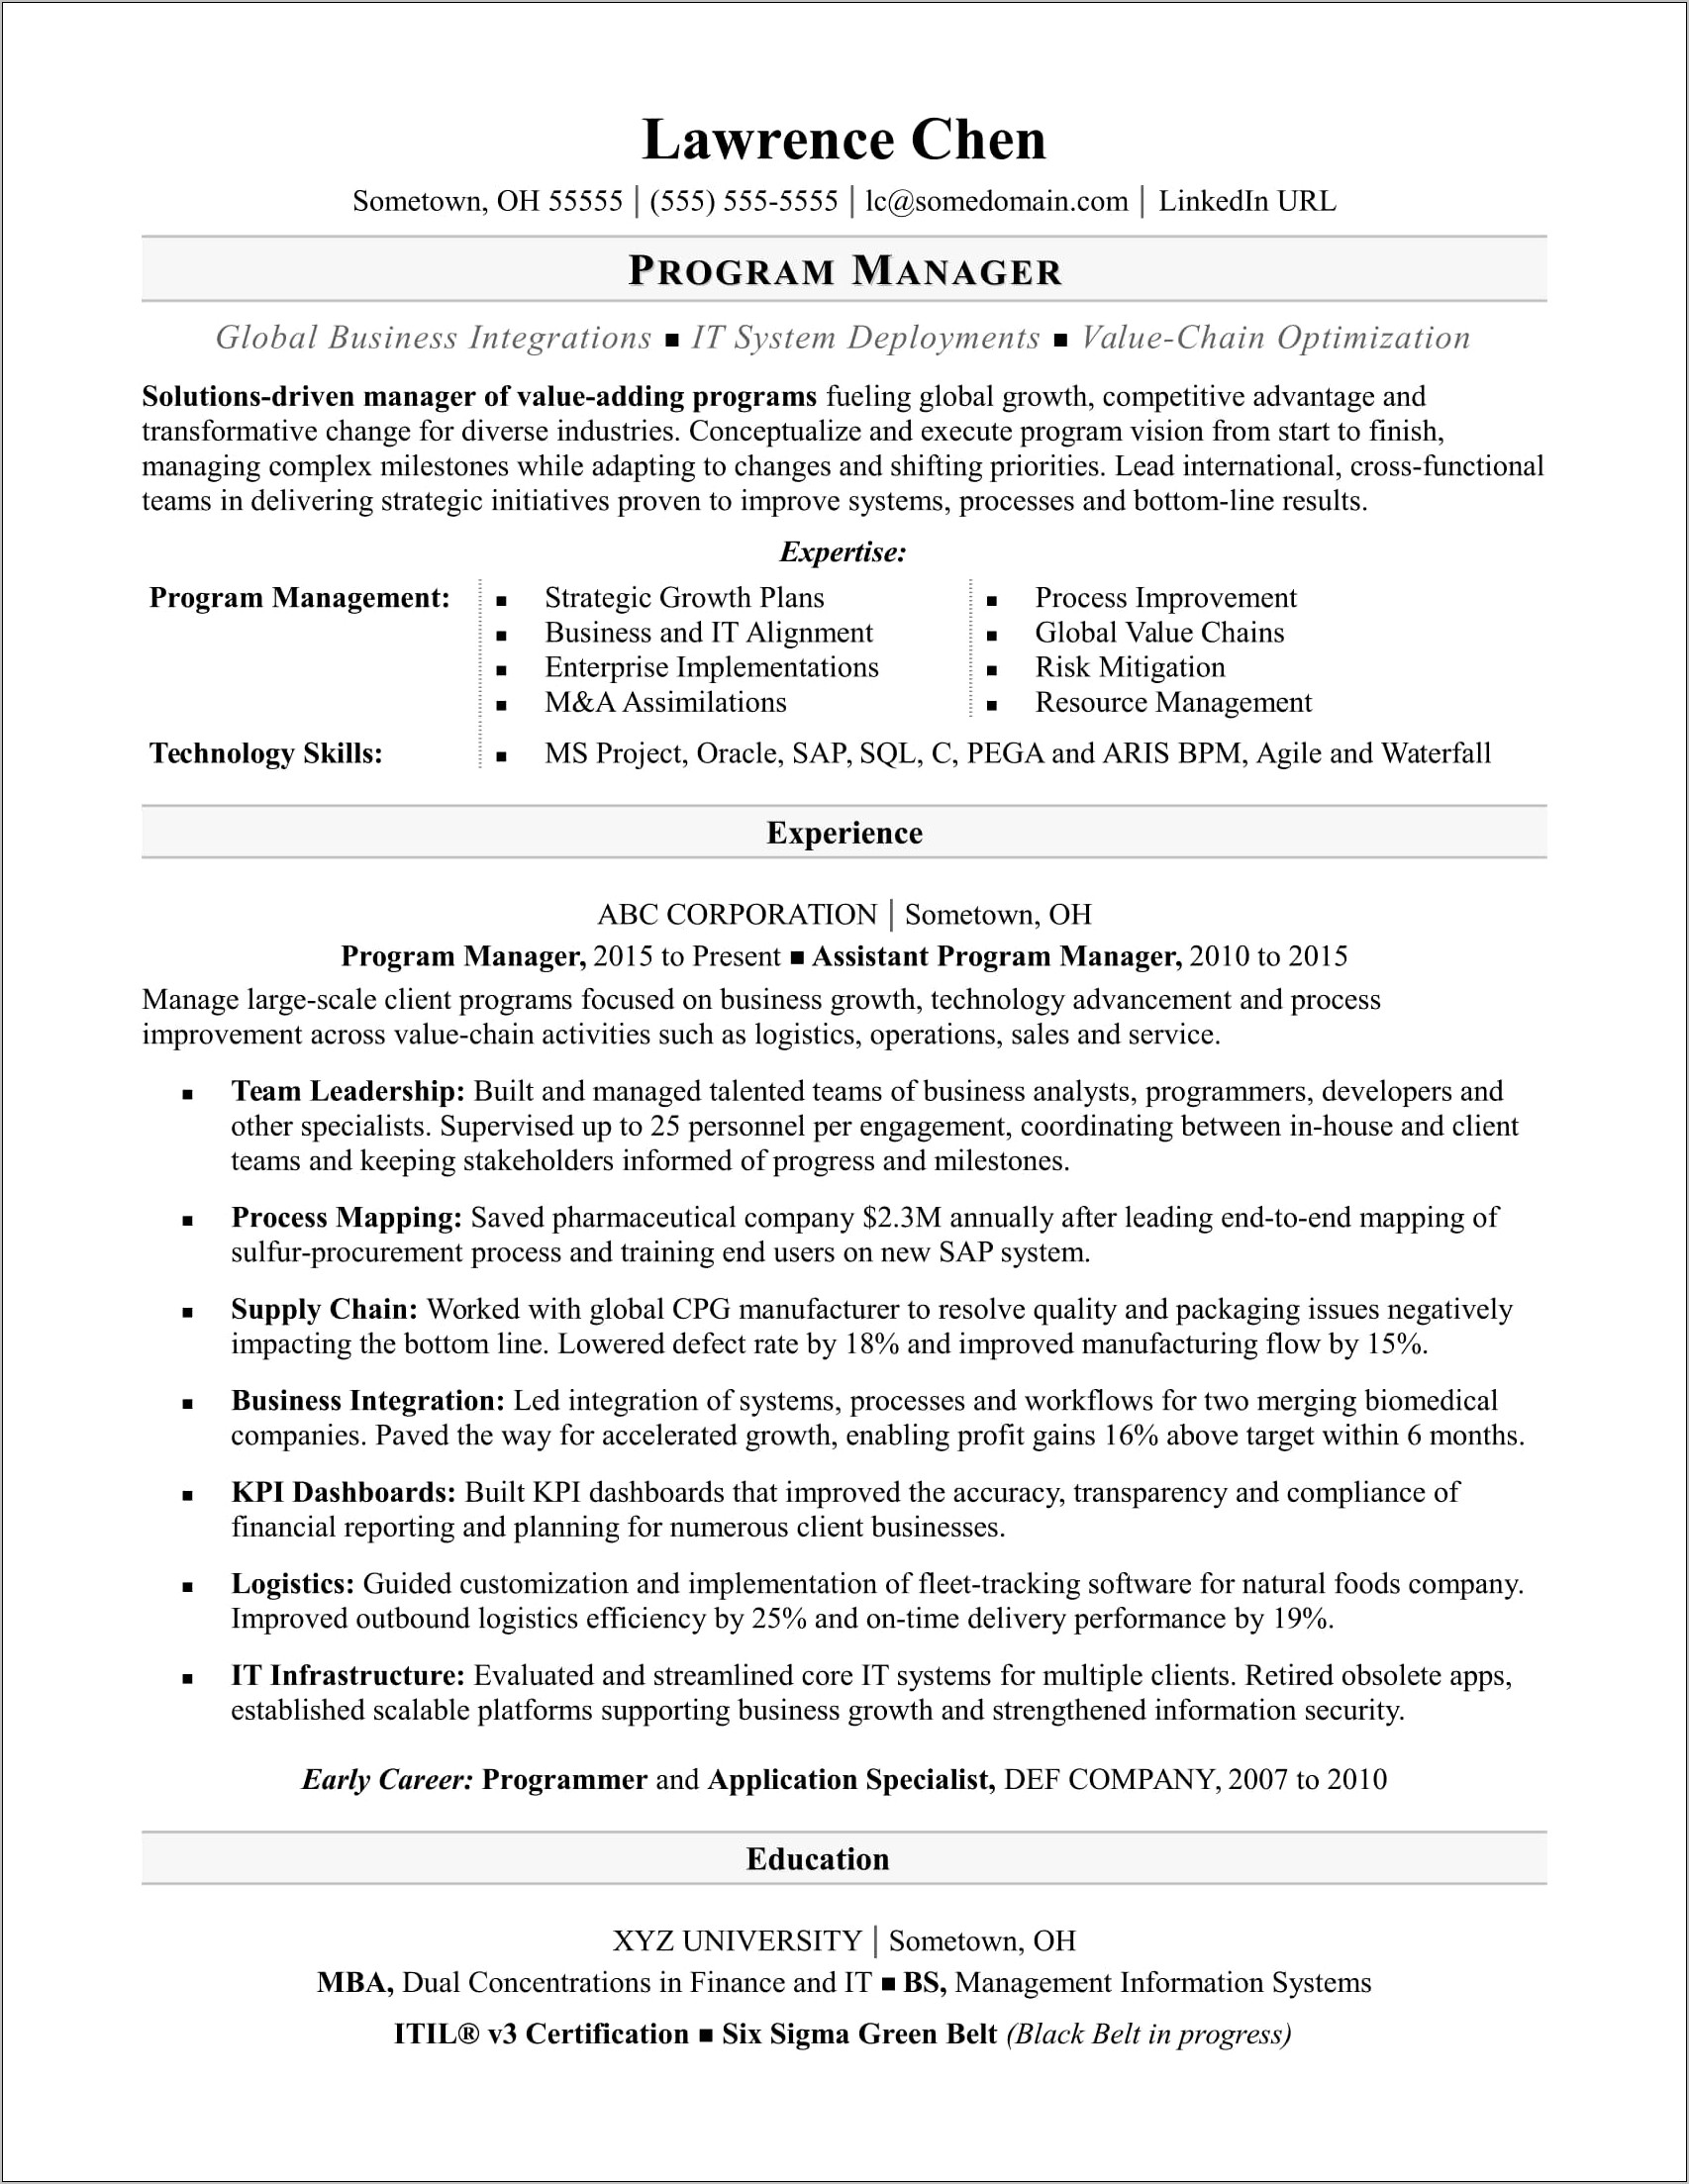 Sample Resume For Mba Admission Interview